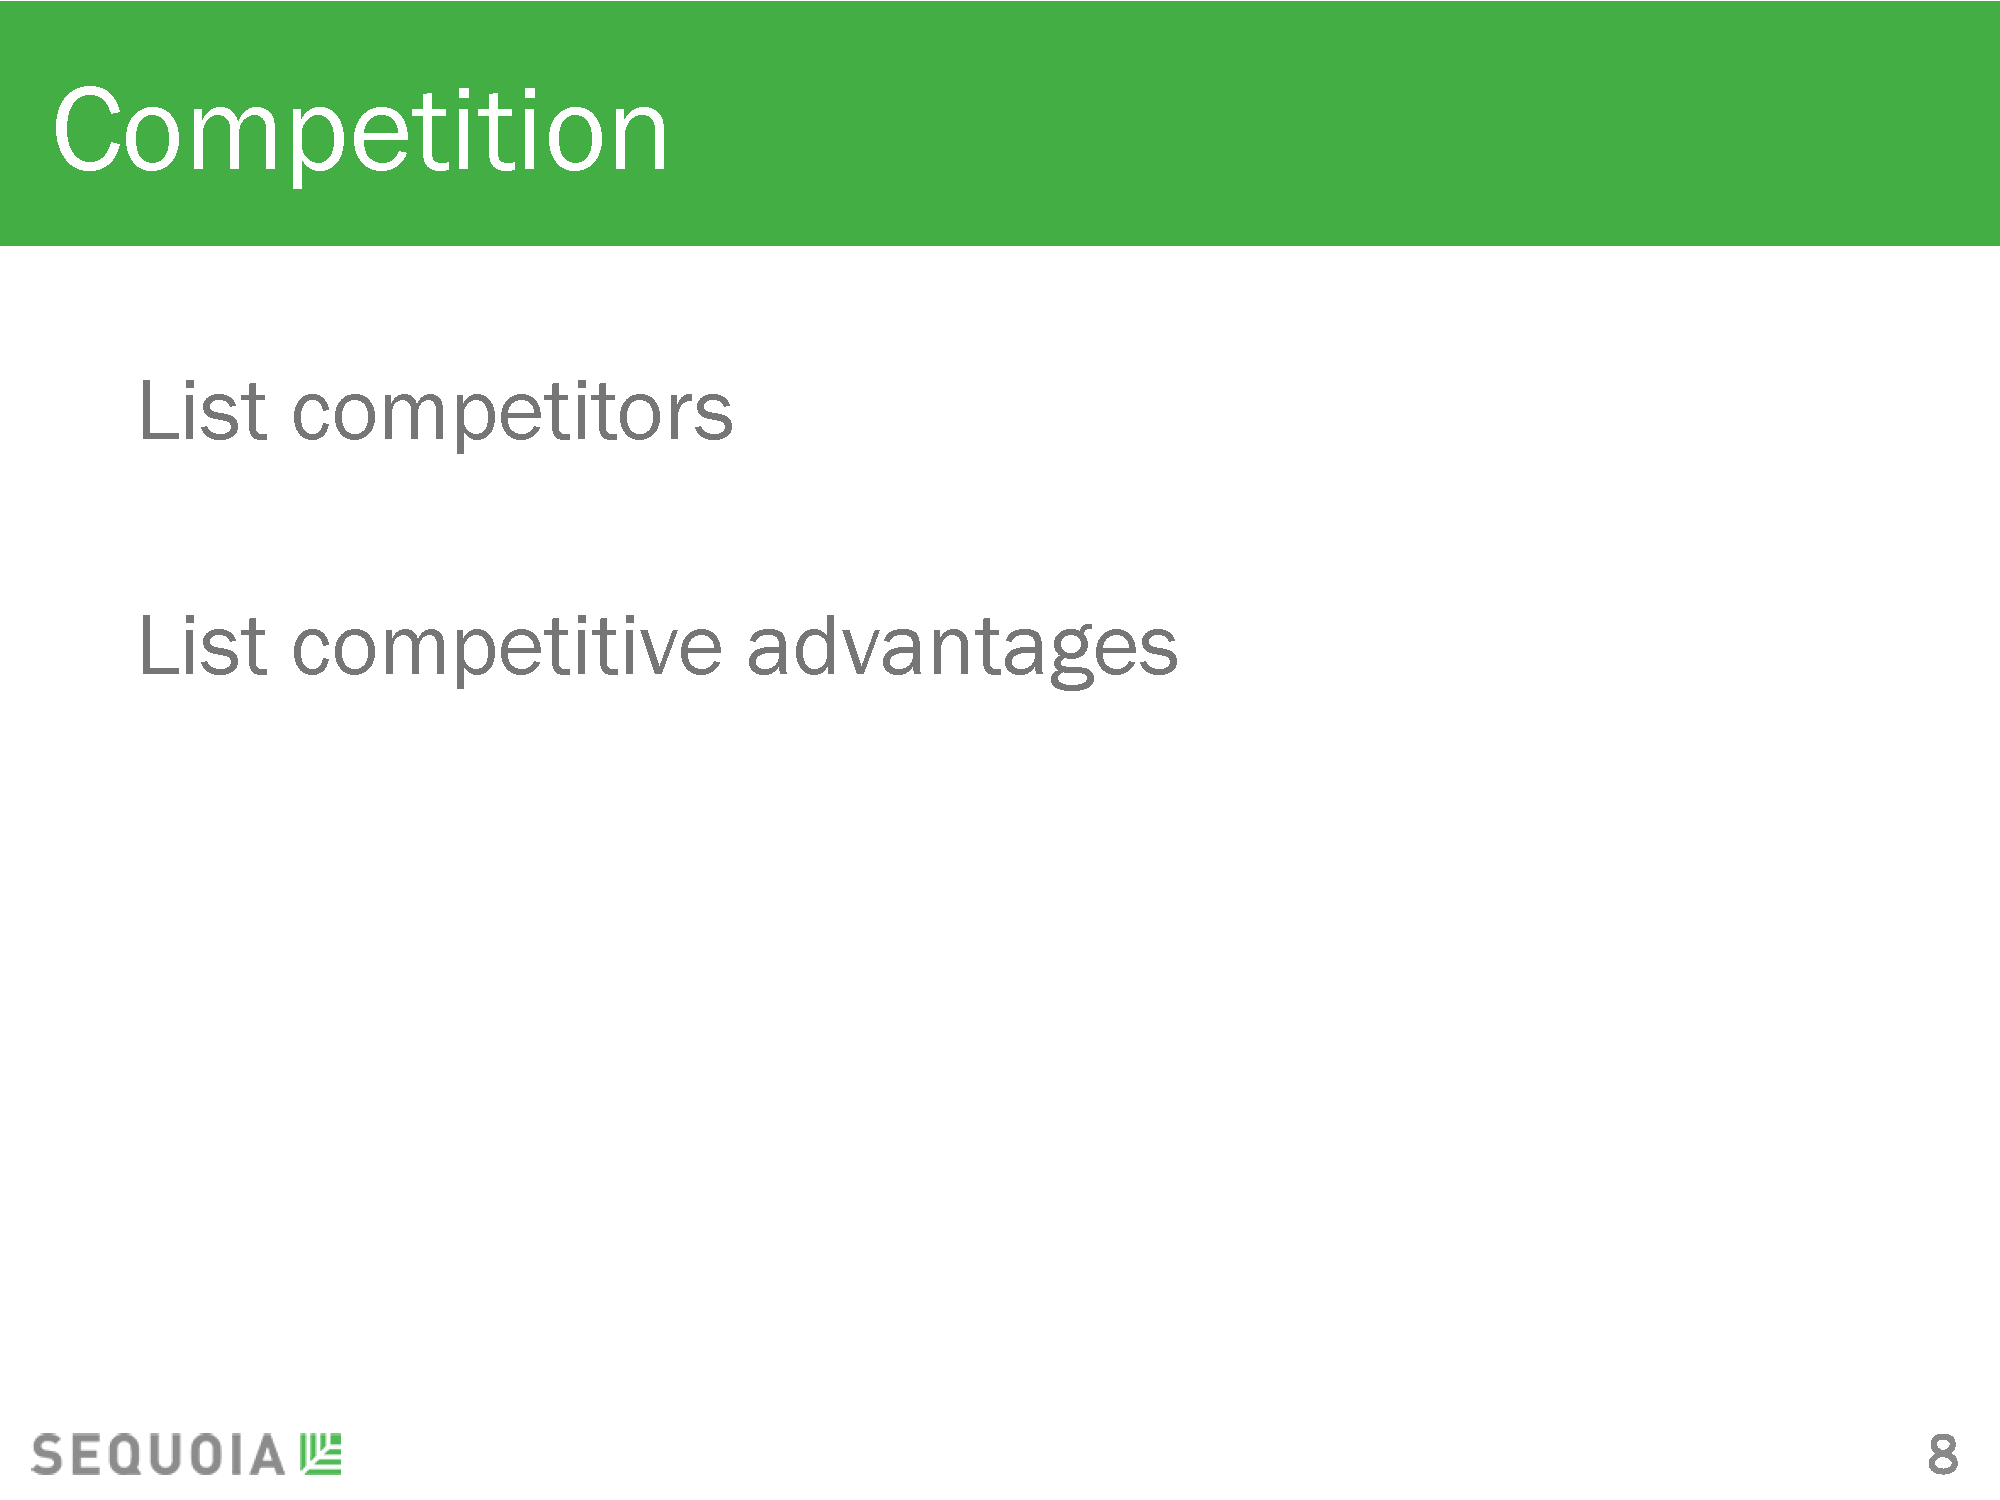 Sequoia Capital Pitch Deck competition